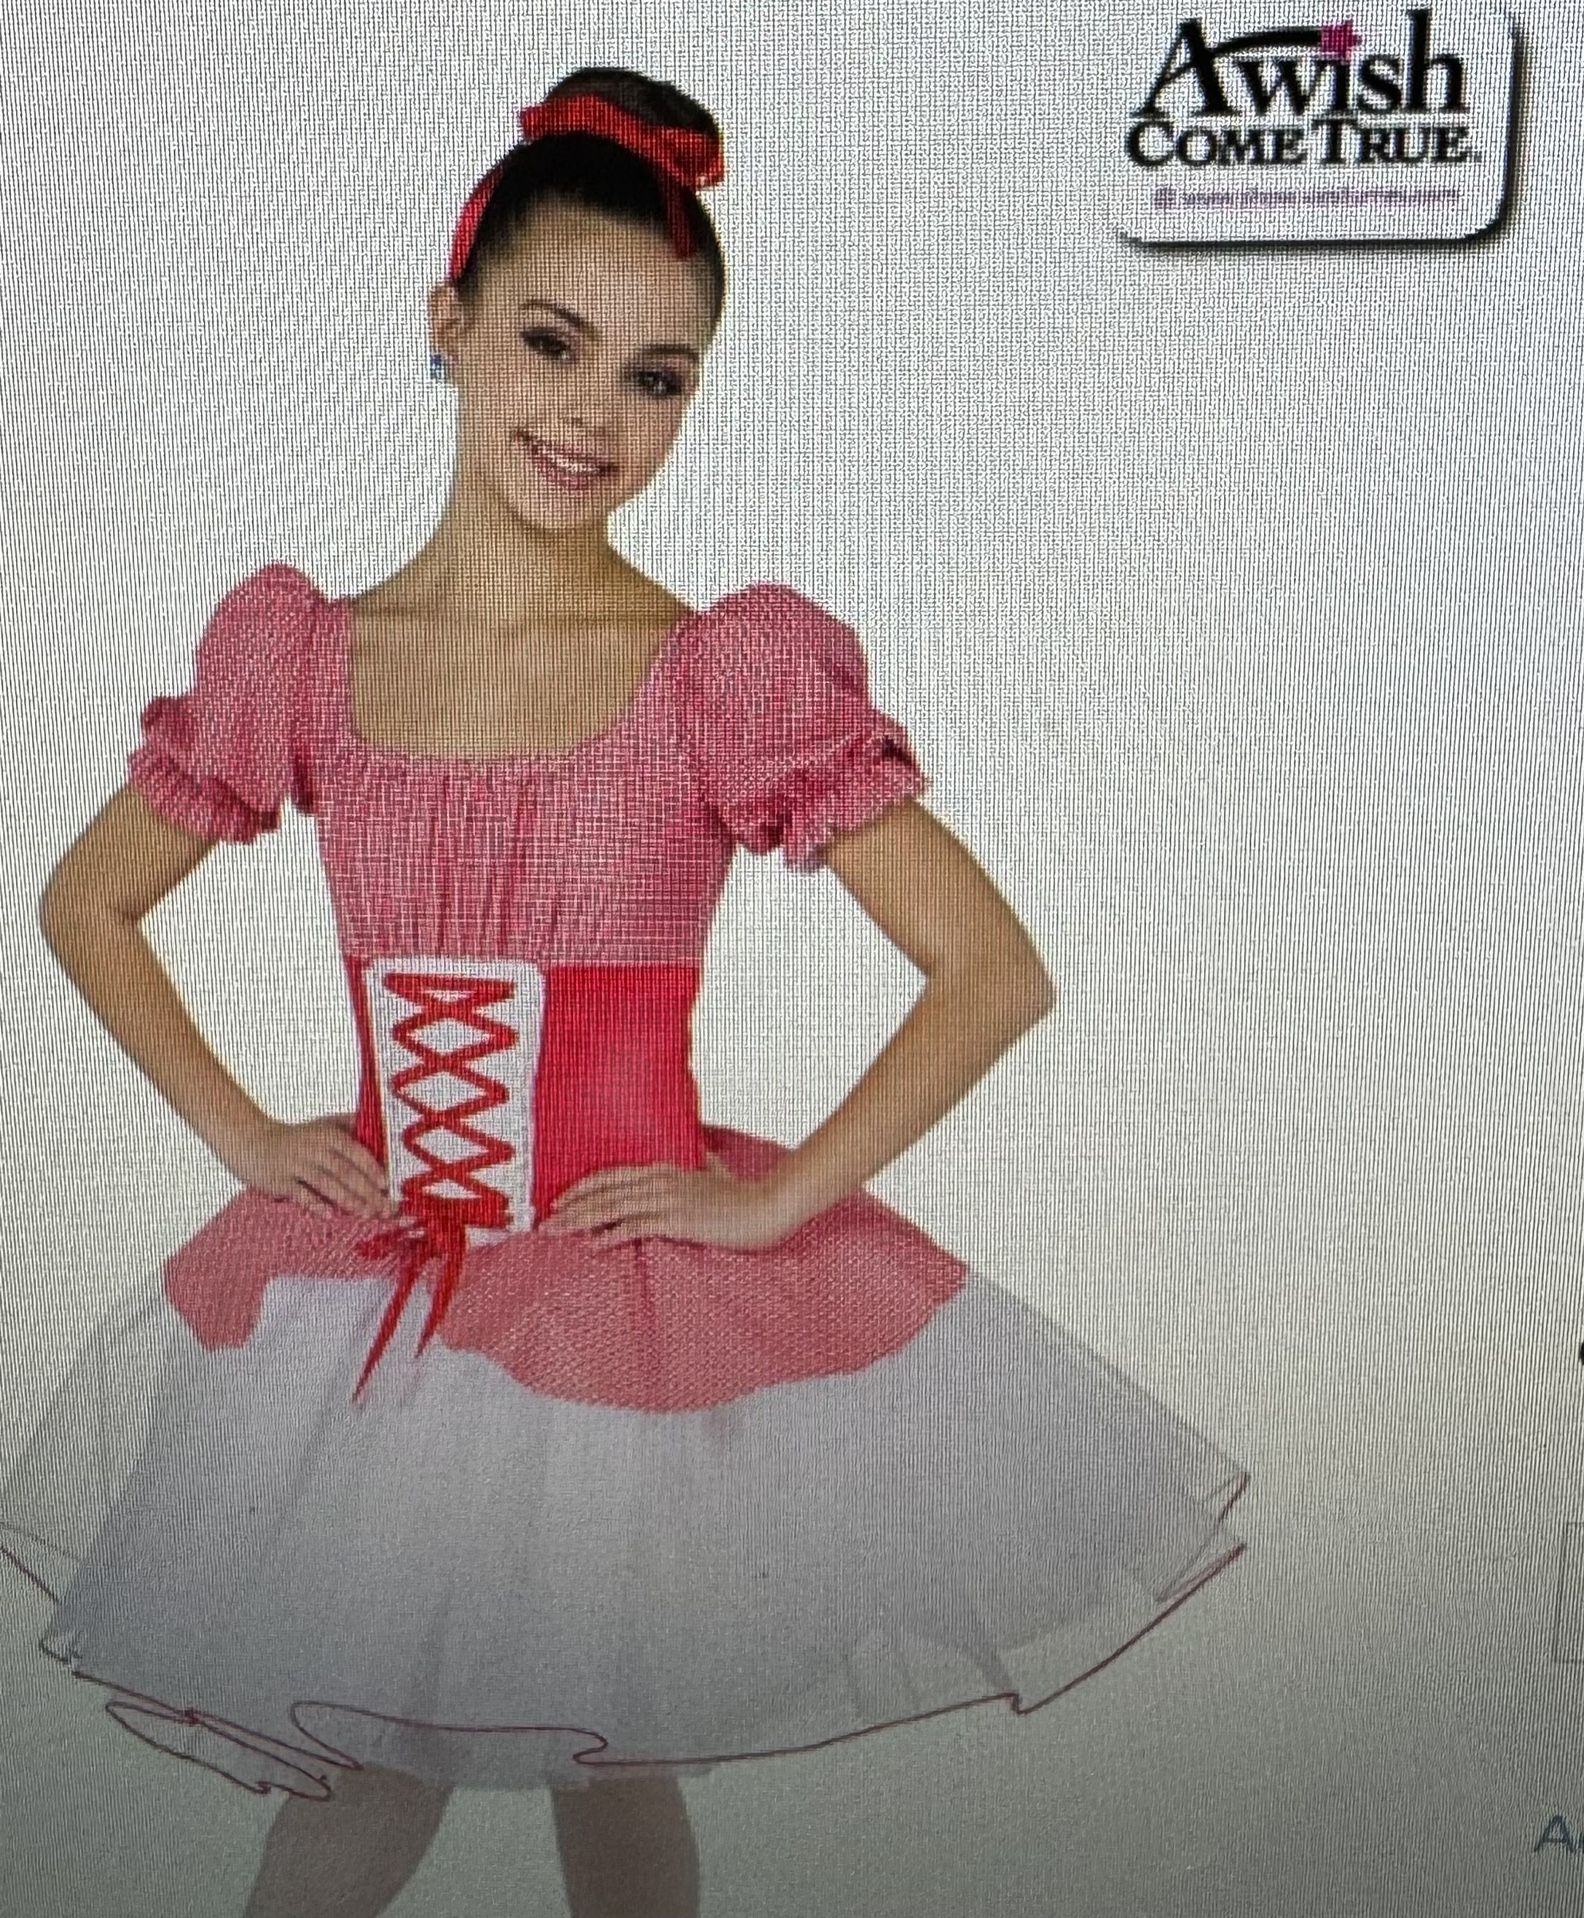 A Wish Come True Appalachian Spring White Tutu Lace Up Red Gingham Dance Ballet Costume, size S